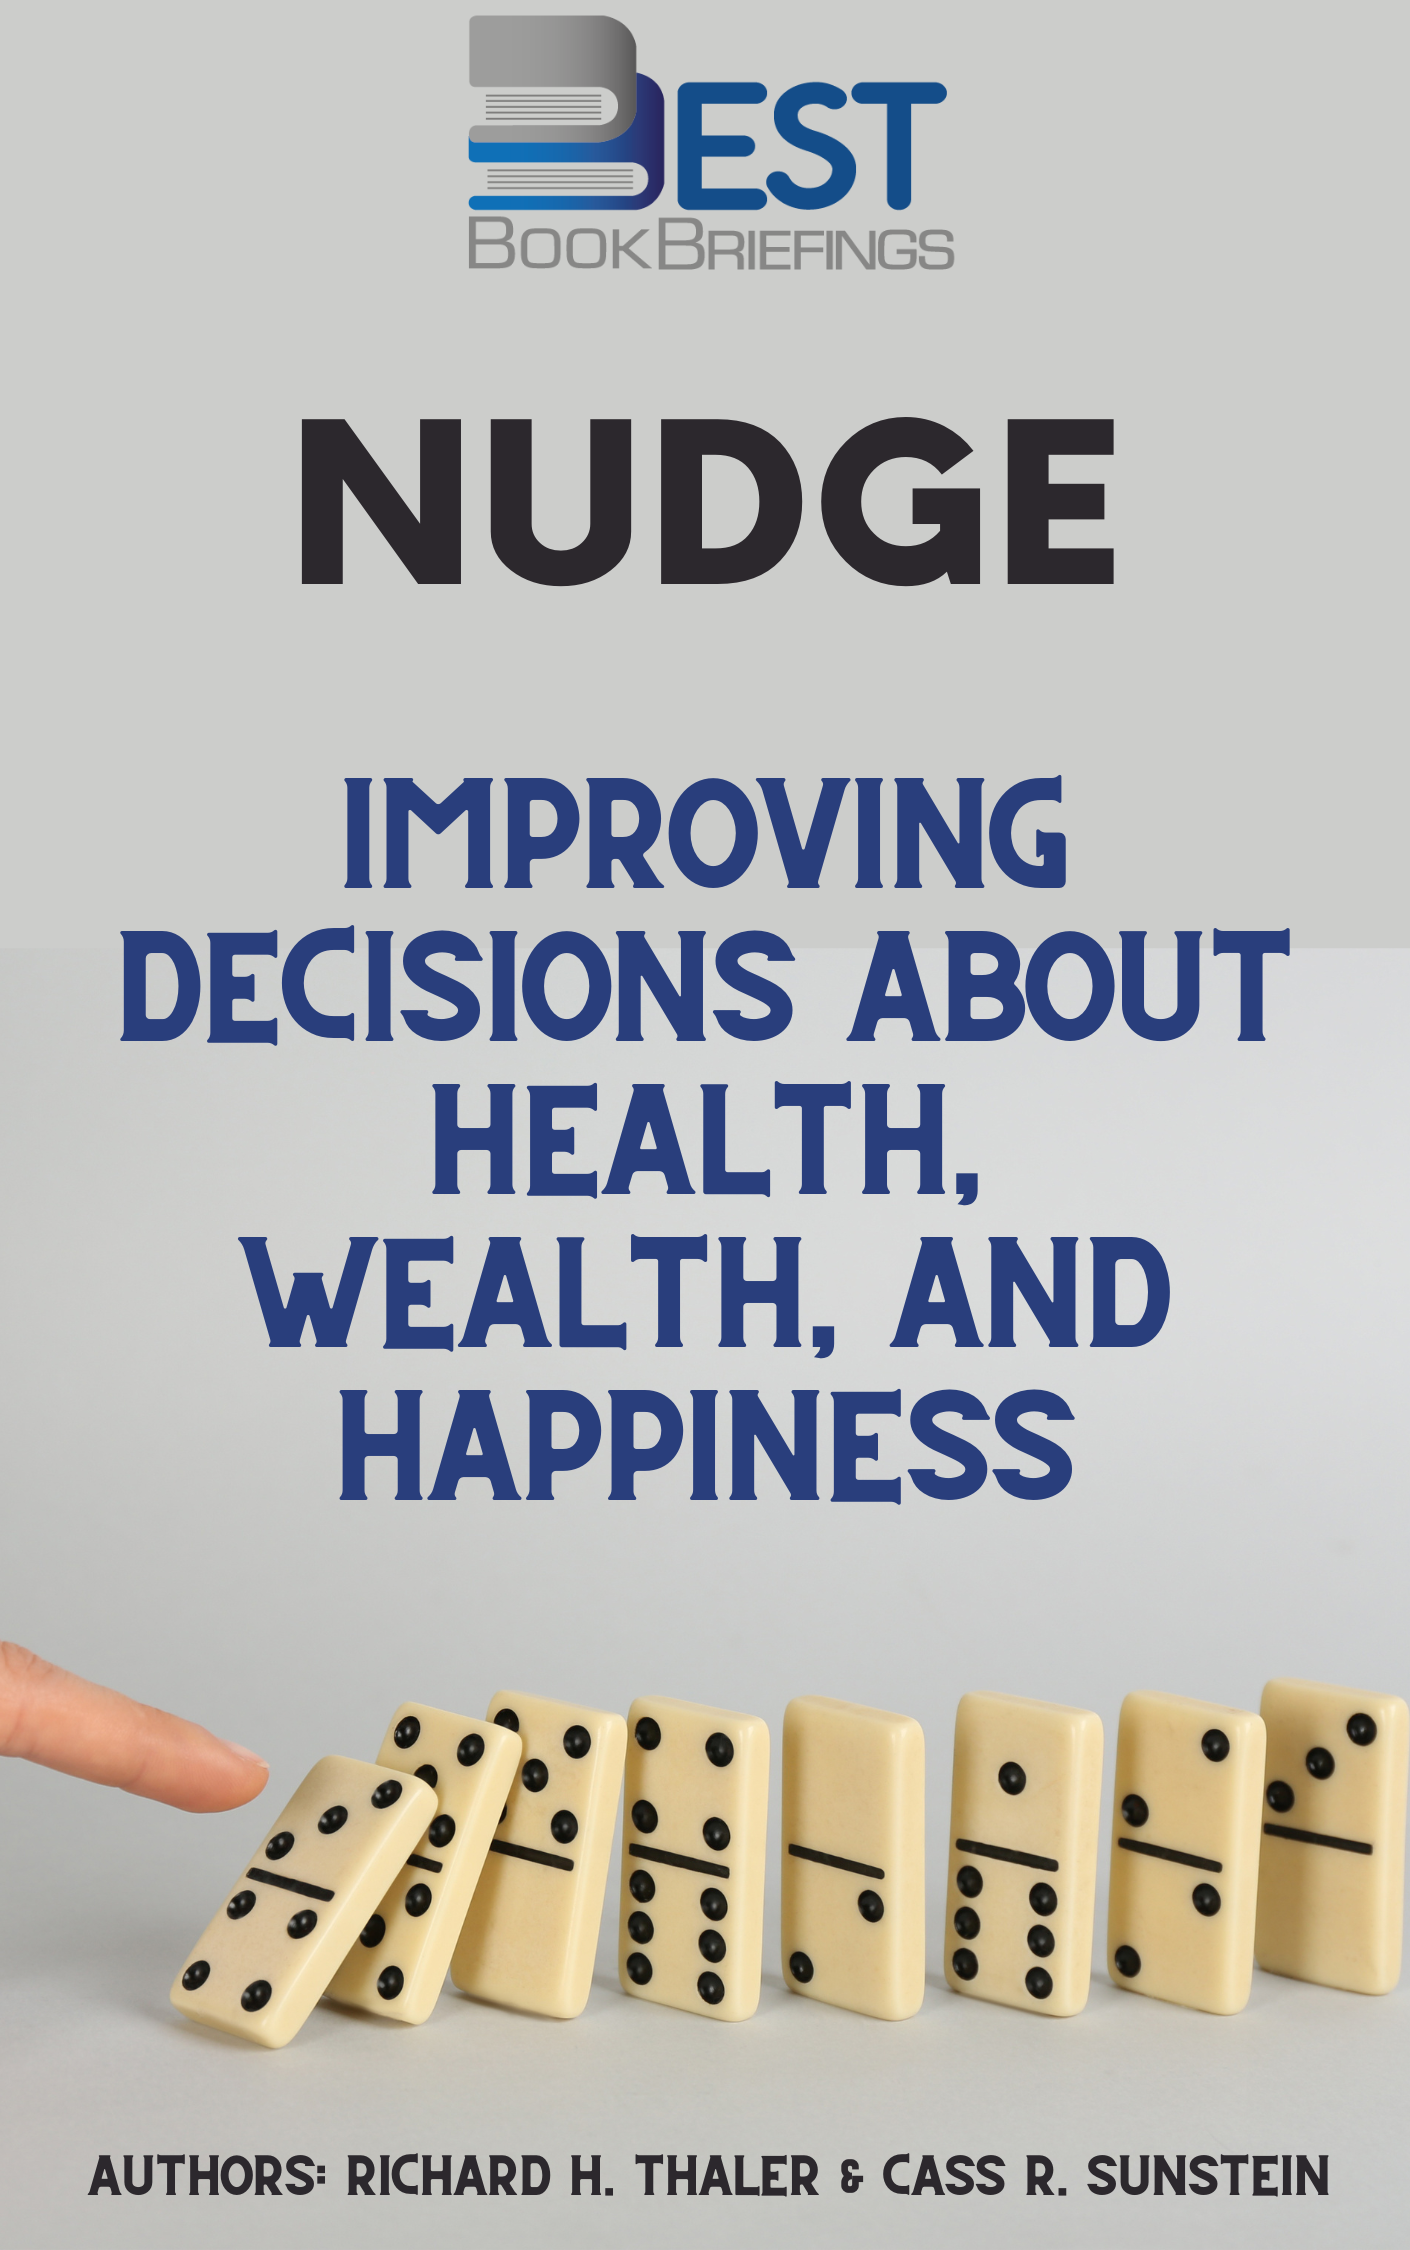 Nudge is about choices—how we make them and how we're led to make better ones. Authors Richard H. Thaler and Cass R. Sunstein offer a new perspective on how to prevent the countless bad mistakes we make in our lives—including ill-advised personal investments, consumption of unhealthy foods, neglect of our natural 